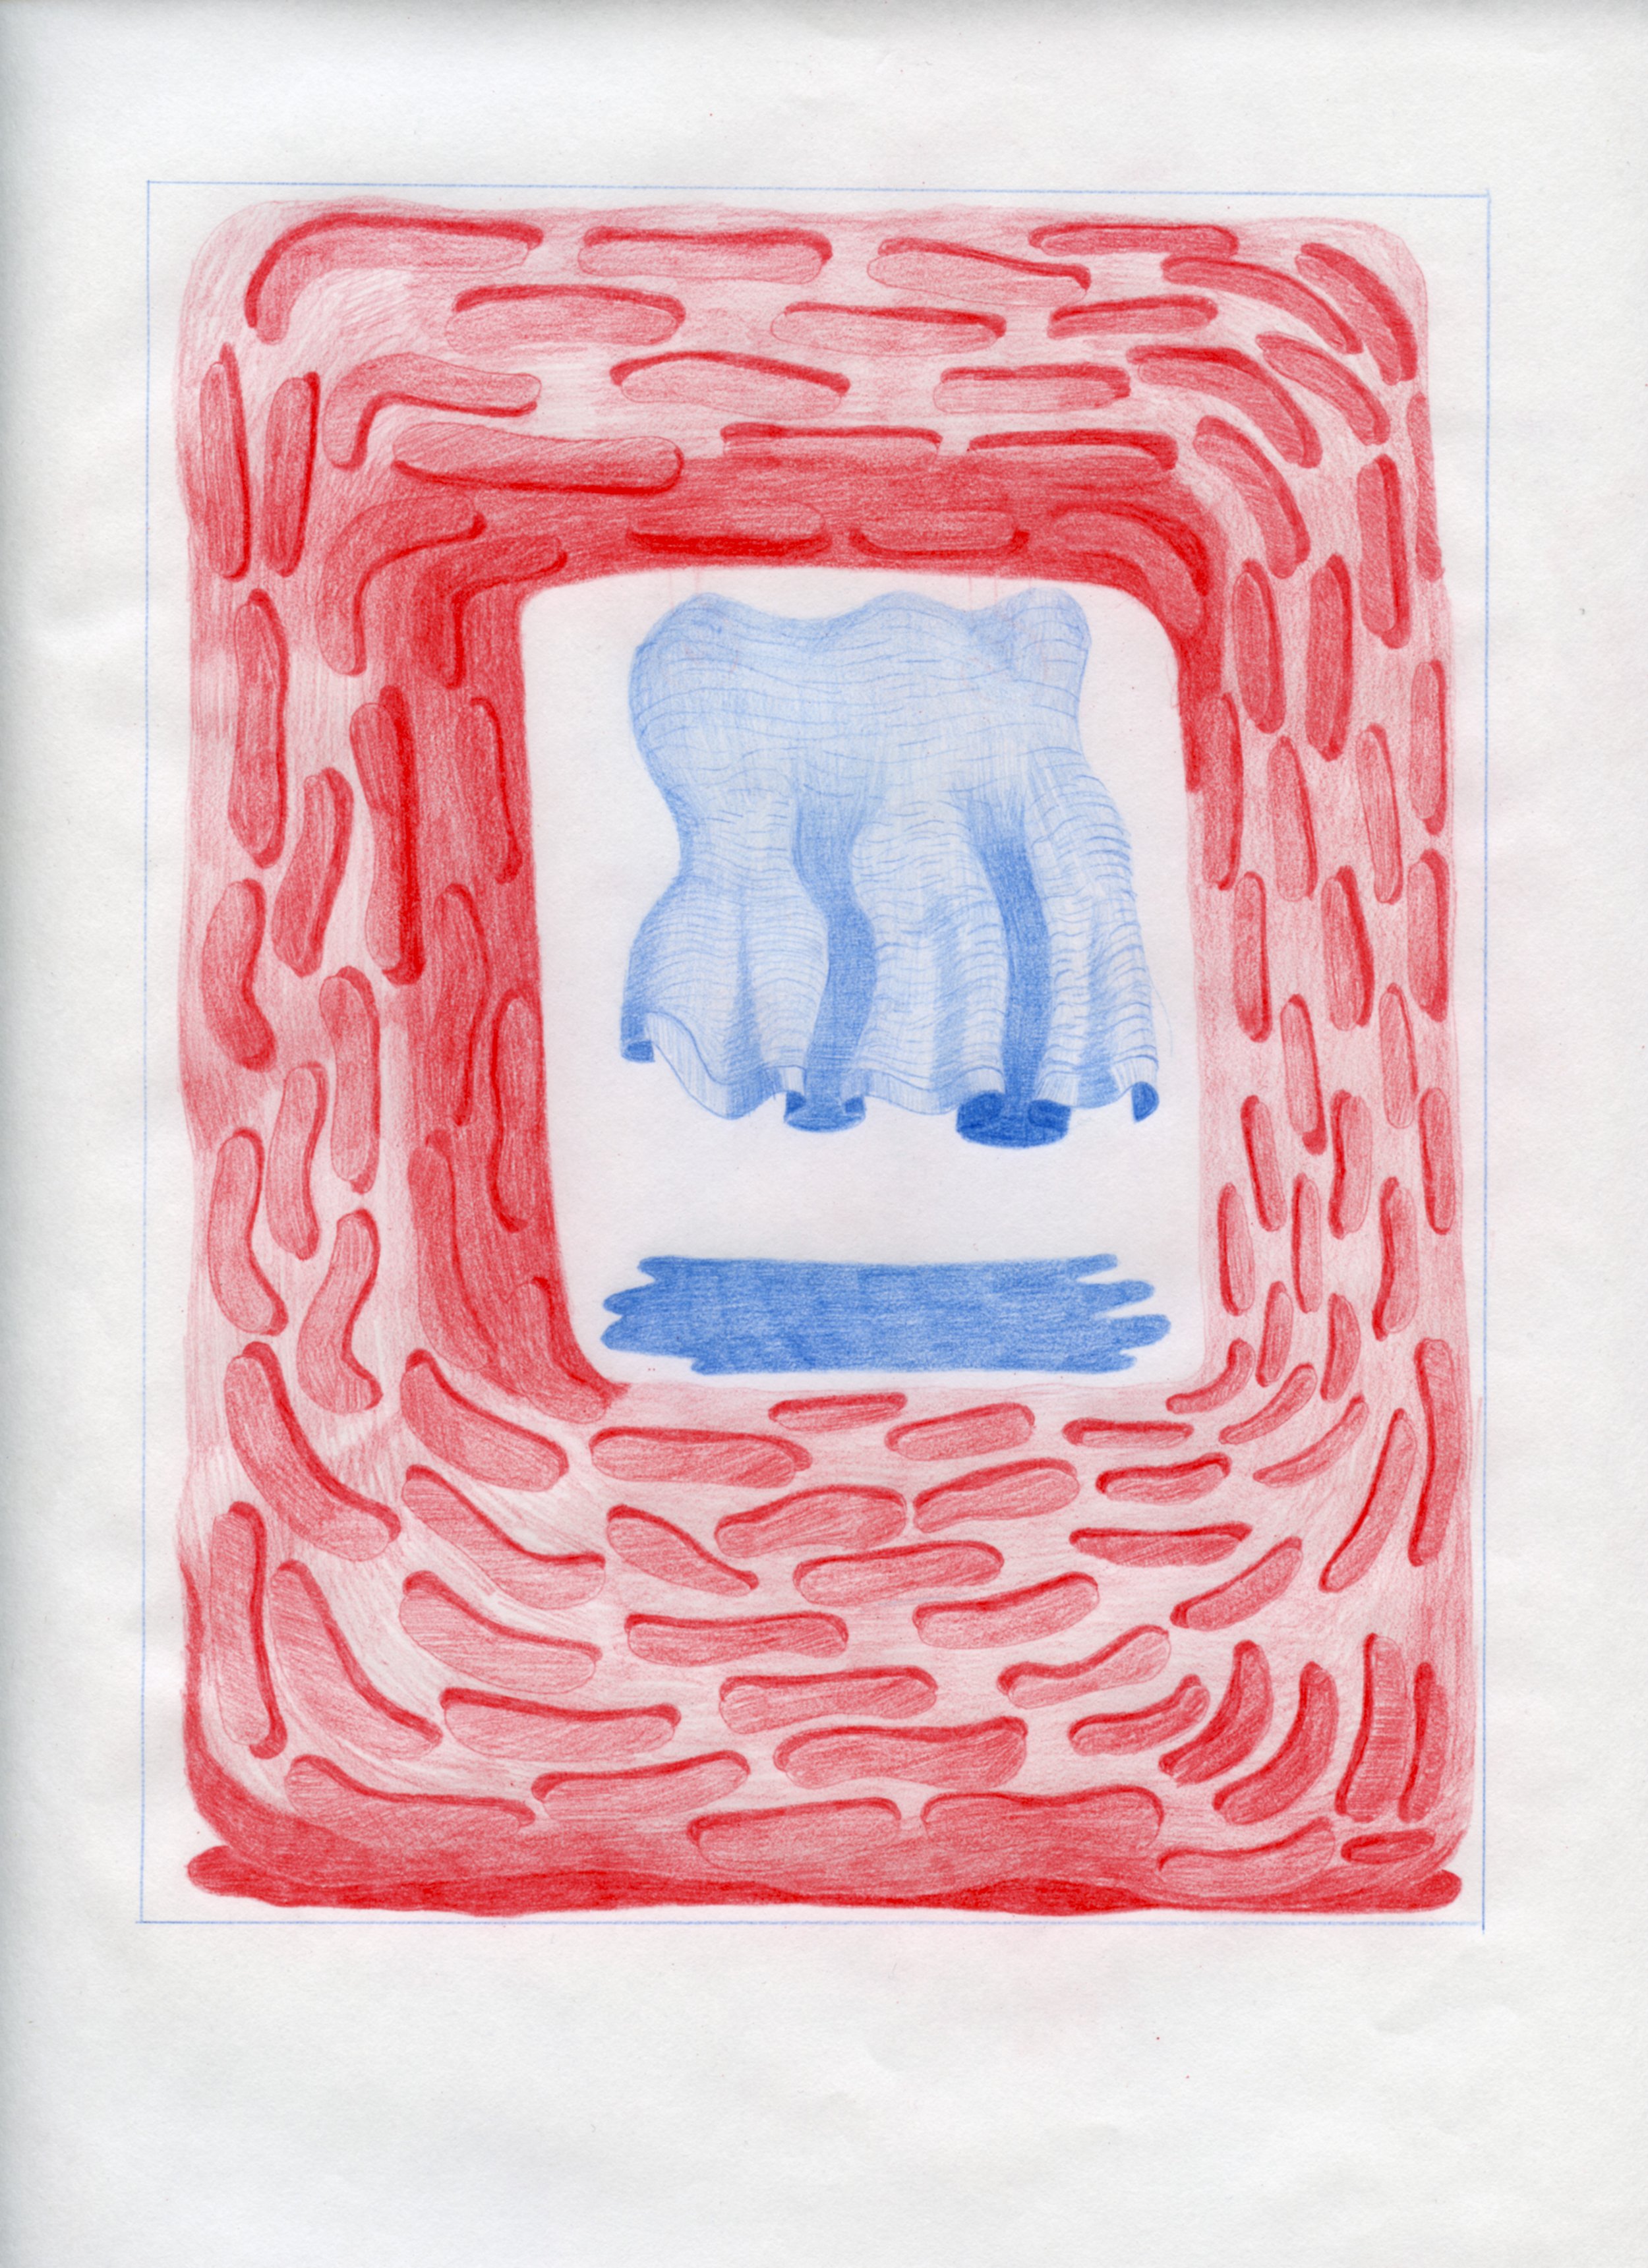  Workplace Drawing #19, 2021, Red and Blue Graphite on Bond Paper, 9”x 12”. 